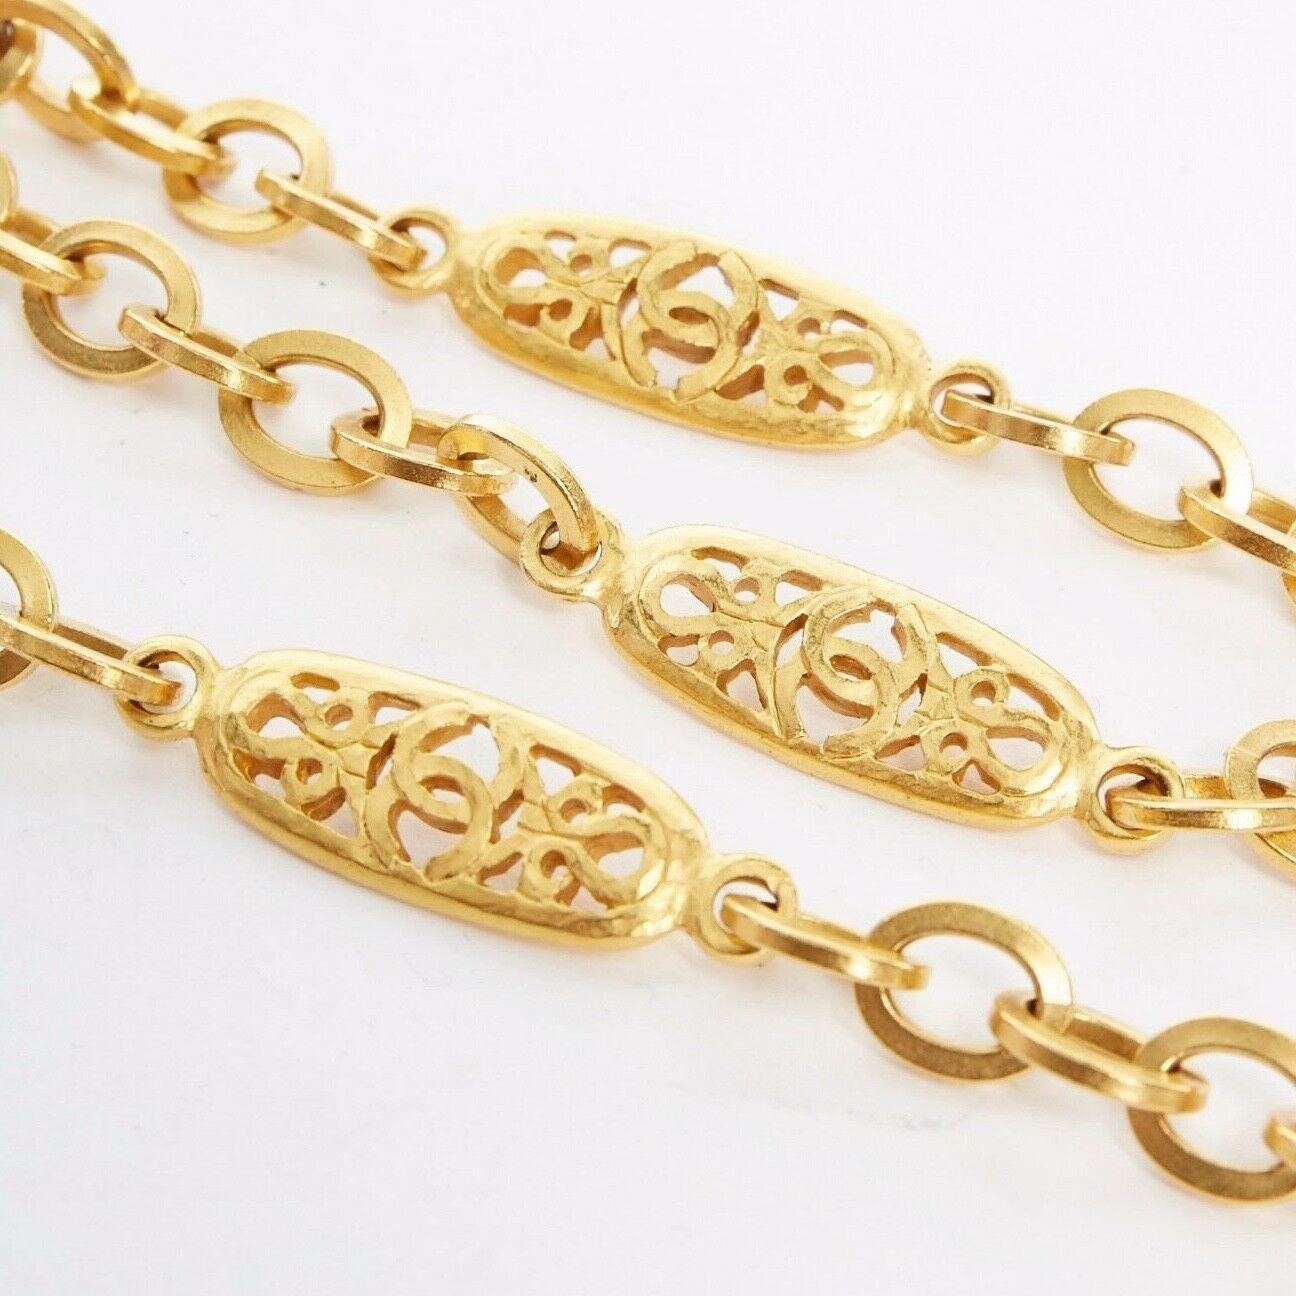 CHANEL Vintage 95P gold baroque CC charm looped chain lobster clasp necklace

CHANEL
STAMPED 